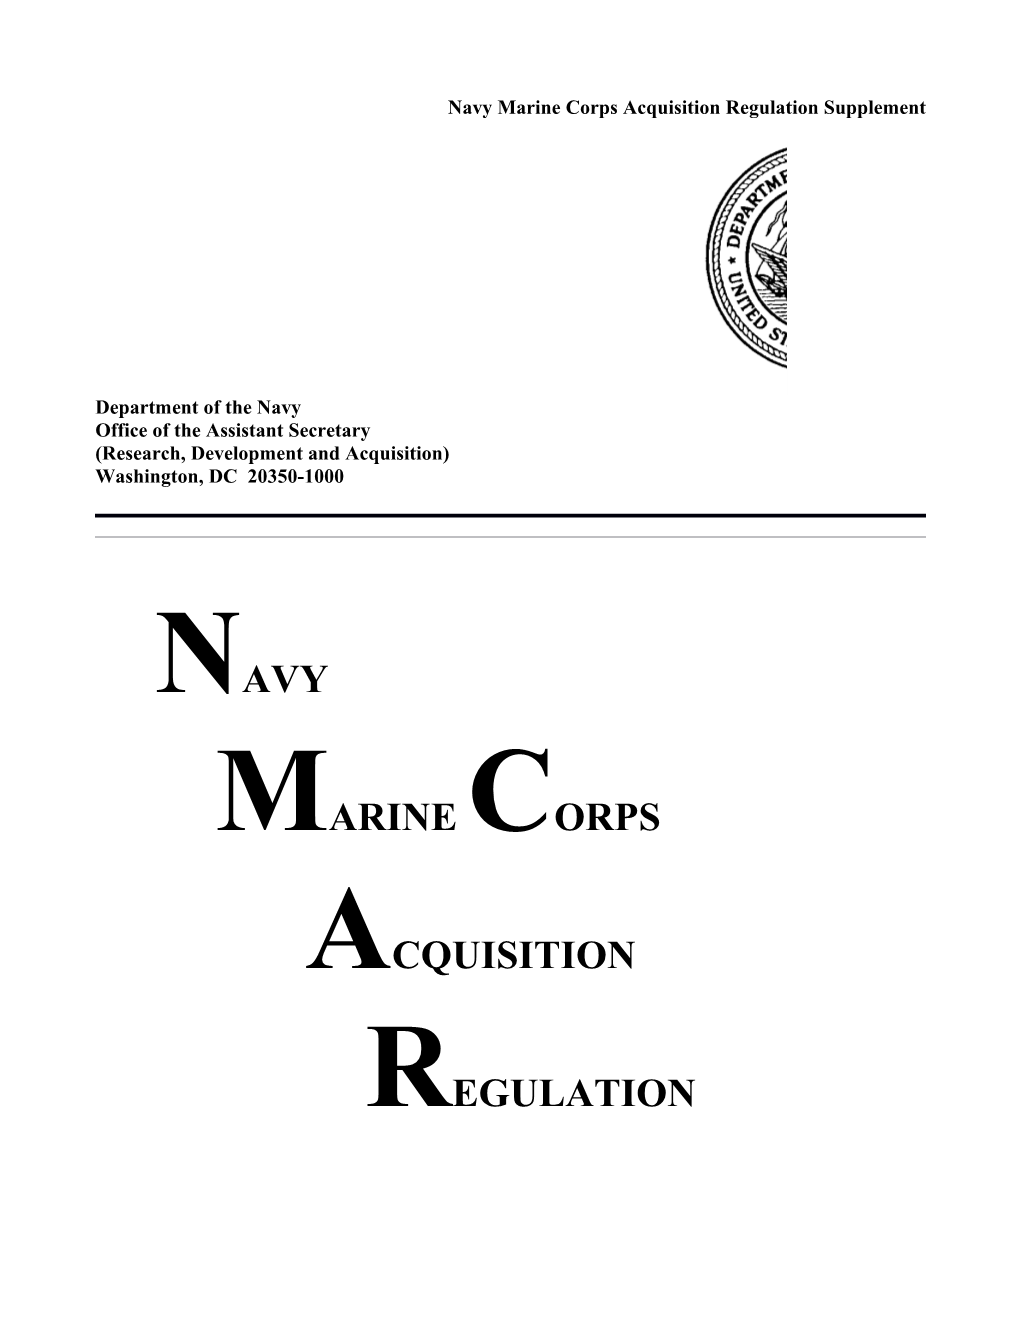 Change 13-03 to the Navy Marine Corps Acquisition Regulation Supplement